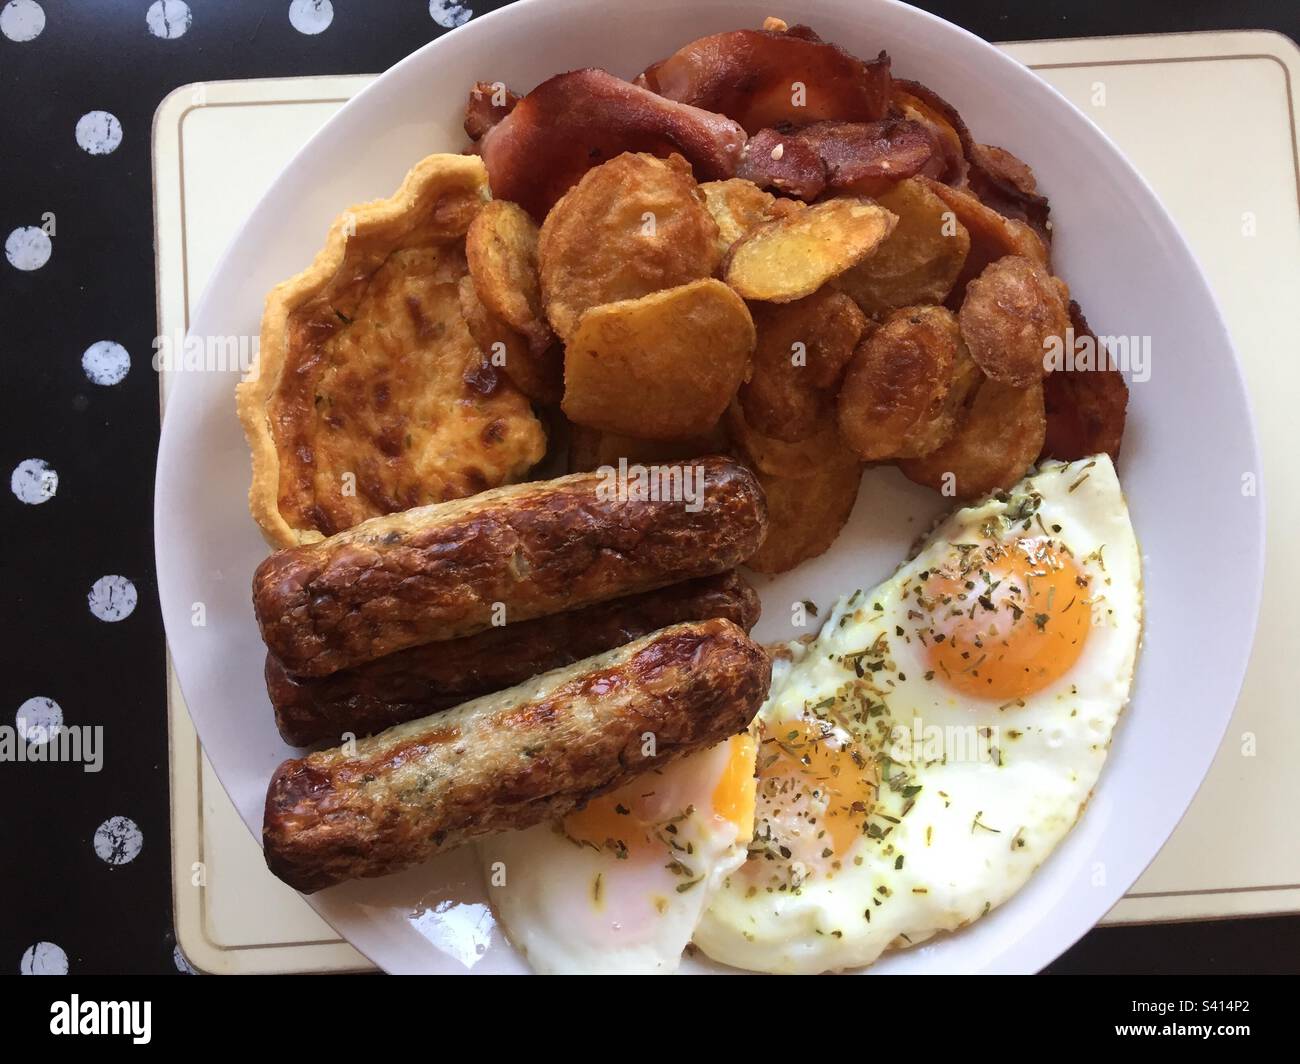 Brunch, sausages, eggs, bacon, potatoes and quiche. Stock Photo